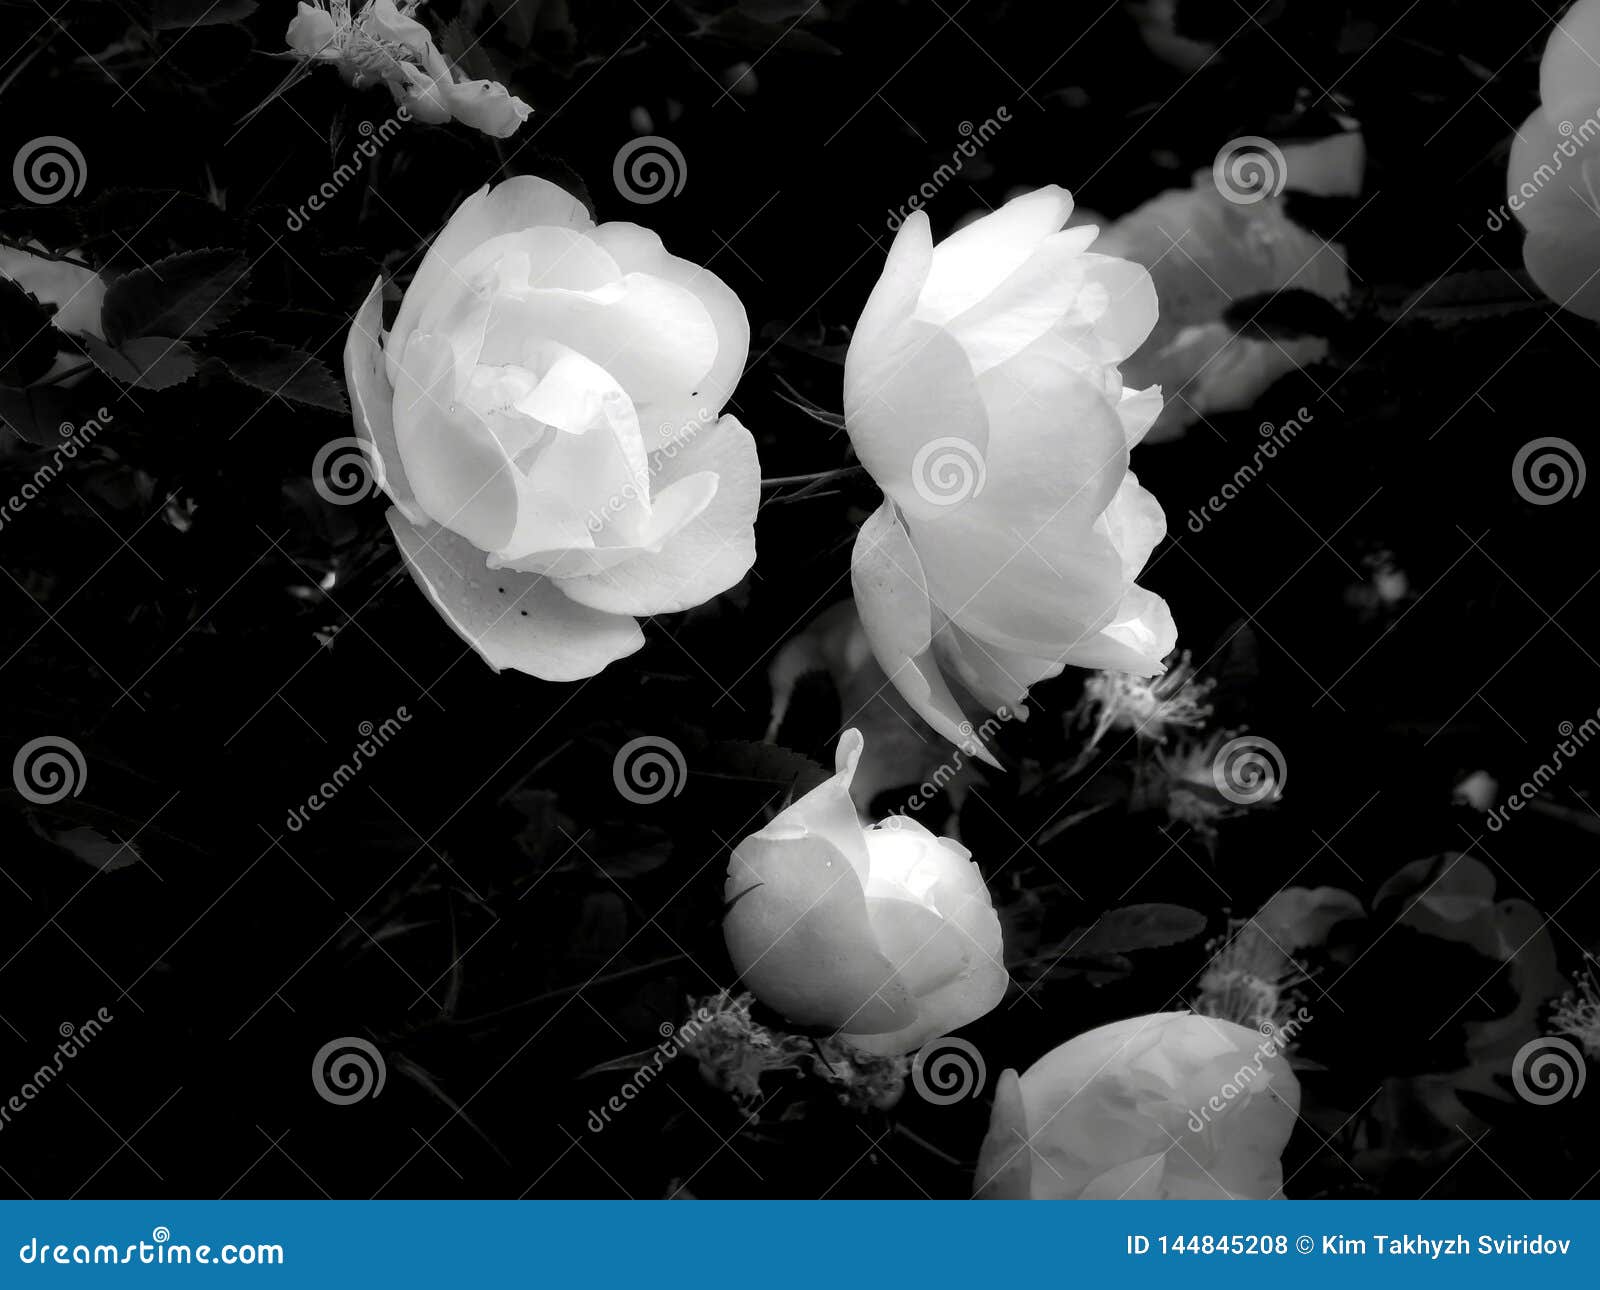 Flowers on a Black and White Photo Stock Photo - Image of plant, fresh ...